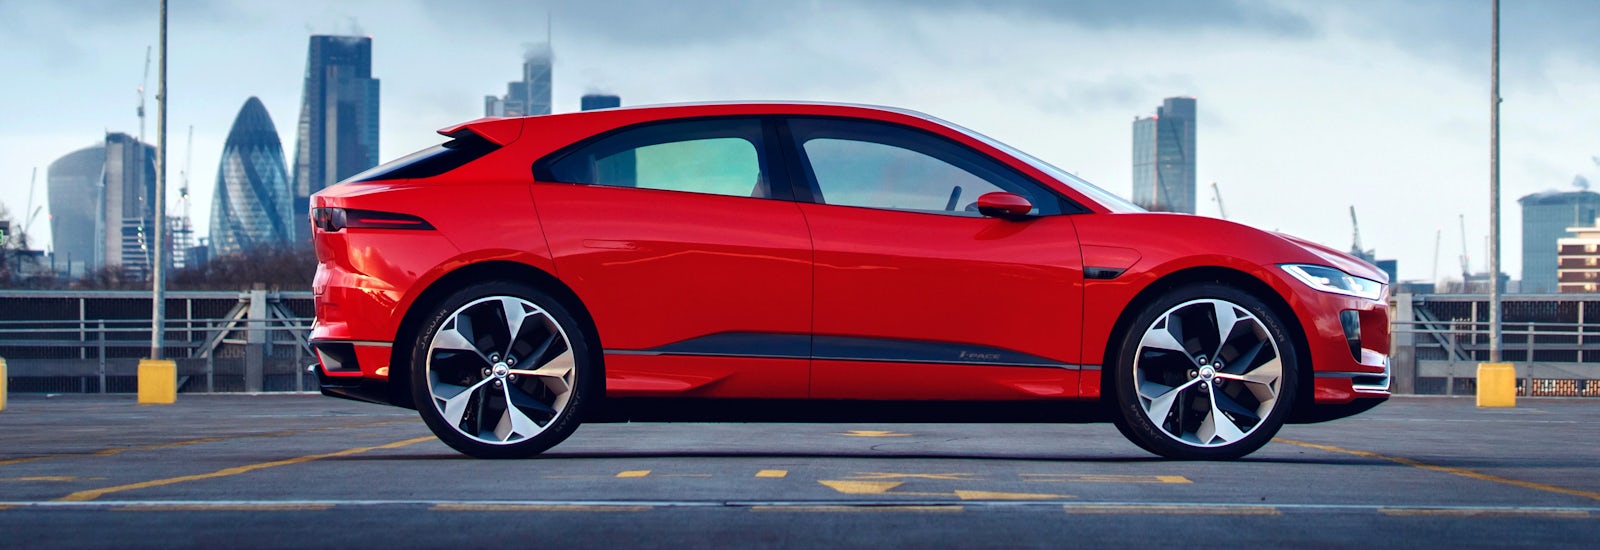 Jaguar I Pace Electric Suv Price Specs Release Date Carwow ...